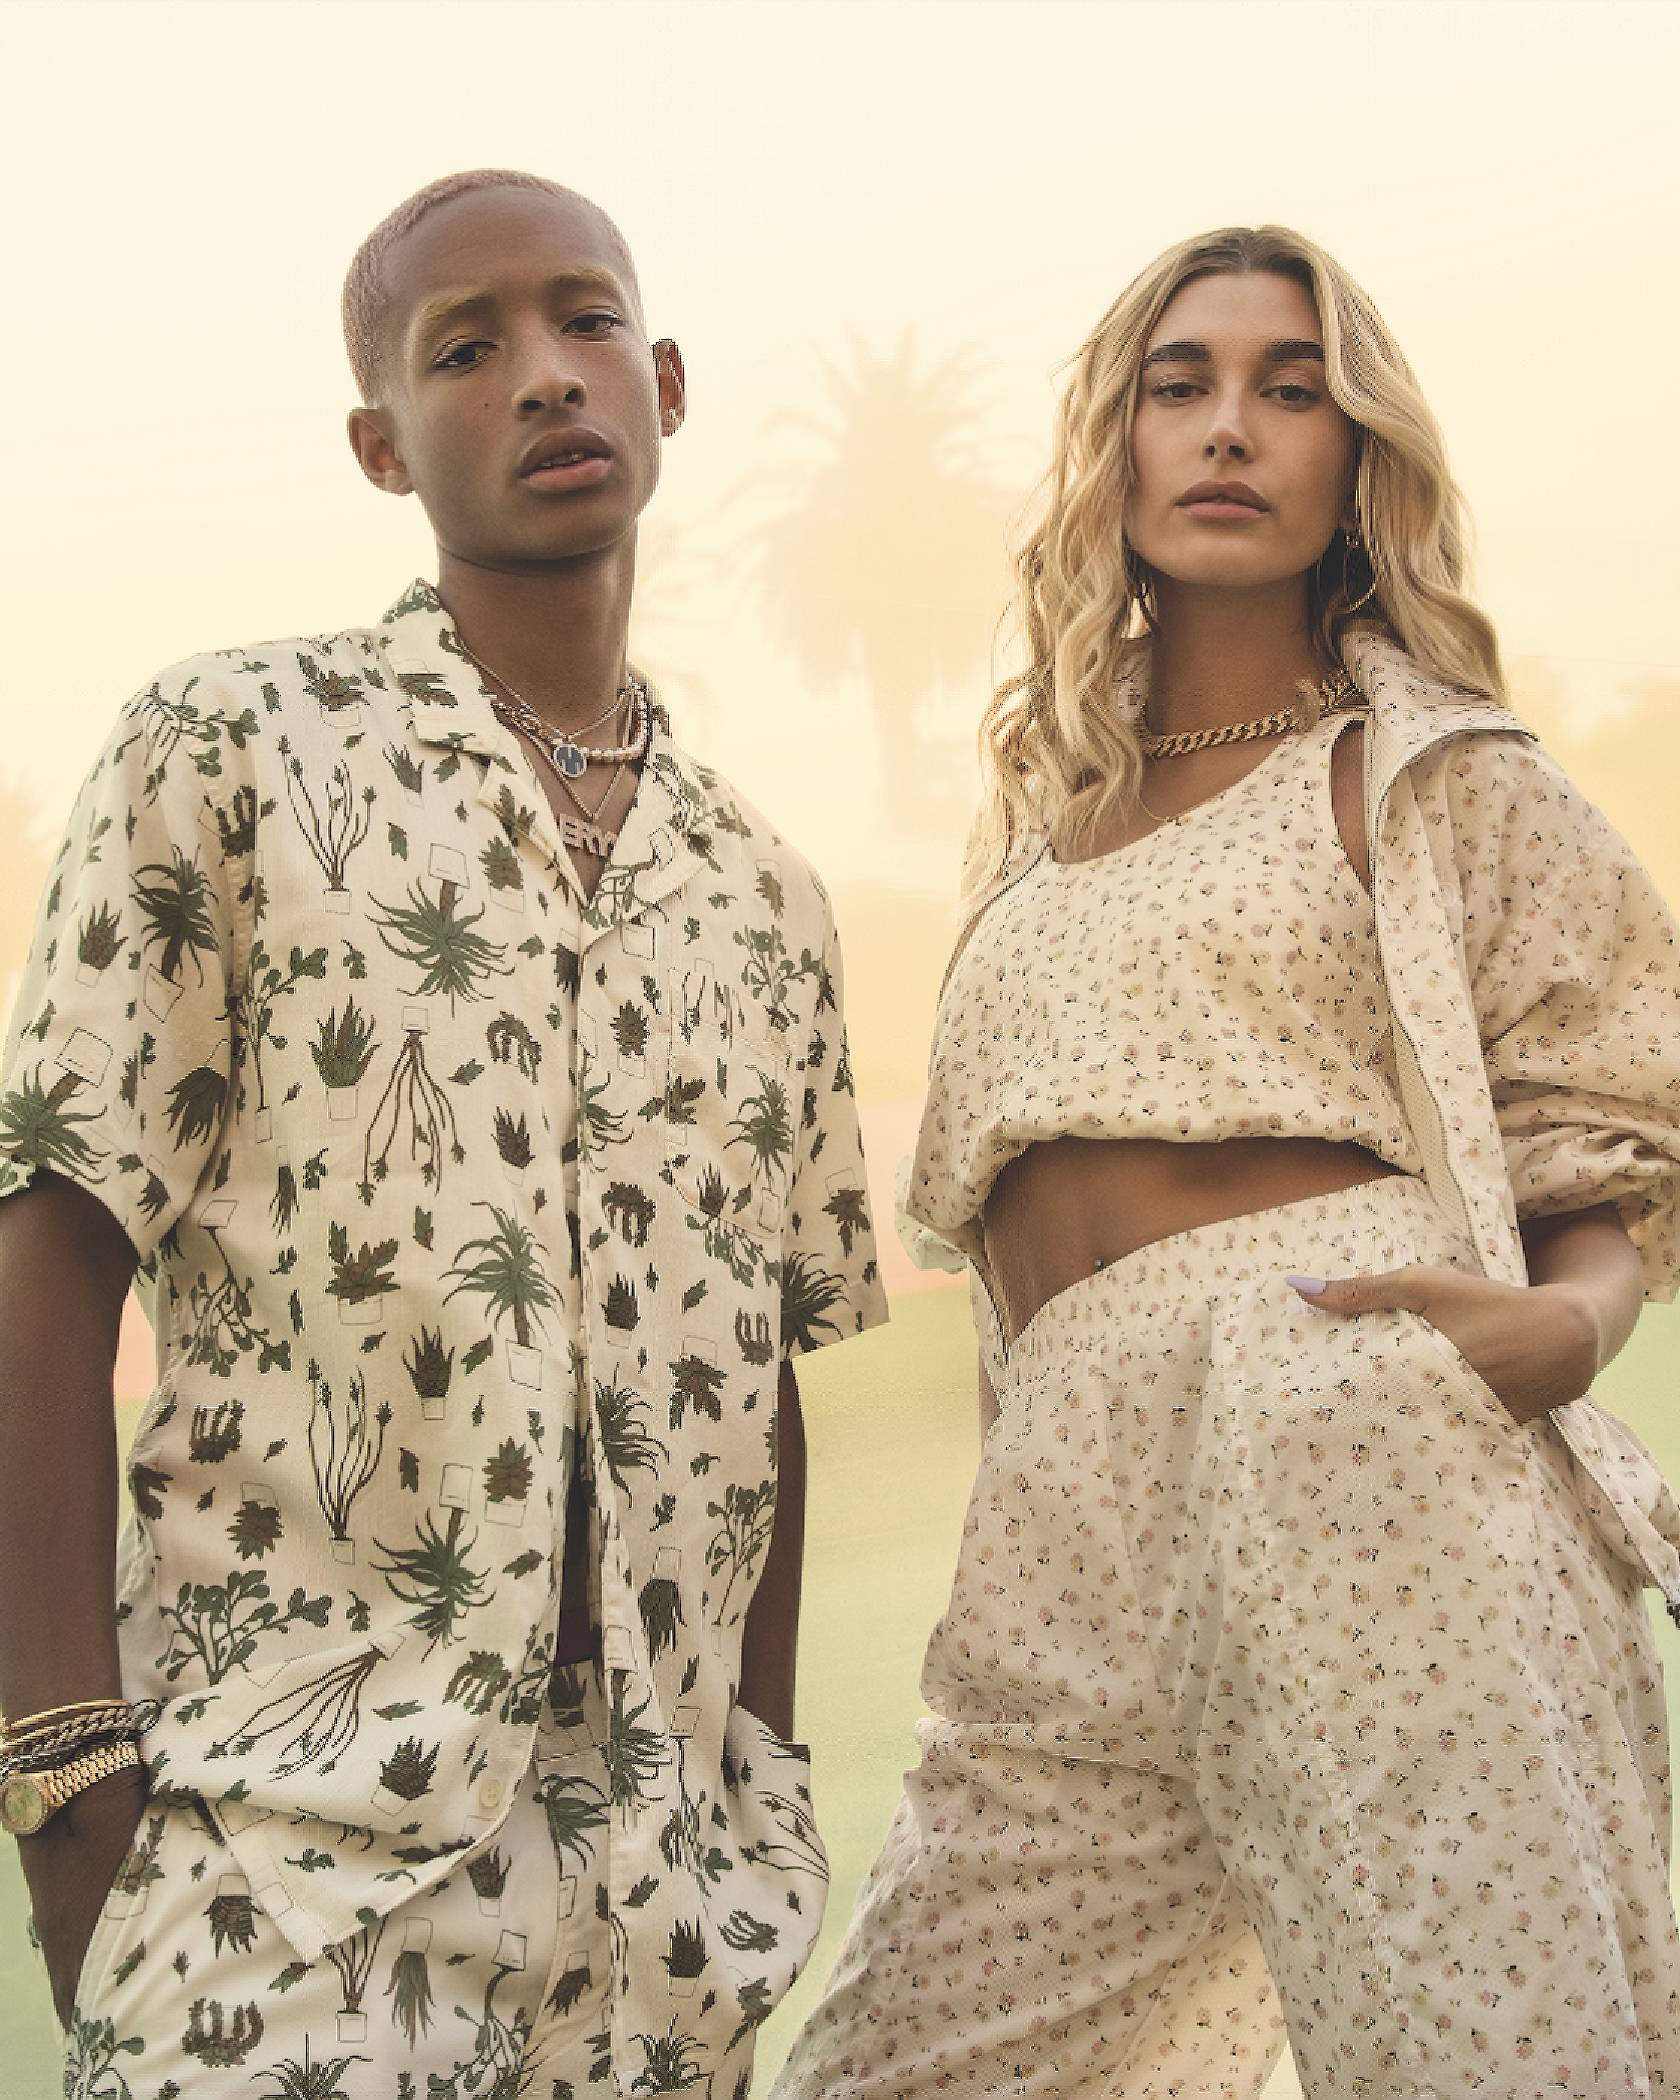 Jaden Smith and Hailey Bieber standing next to each other.